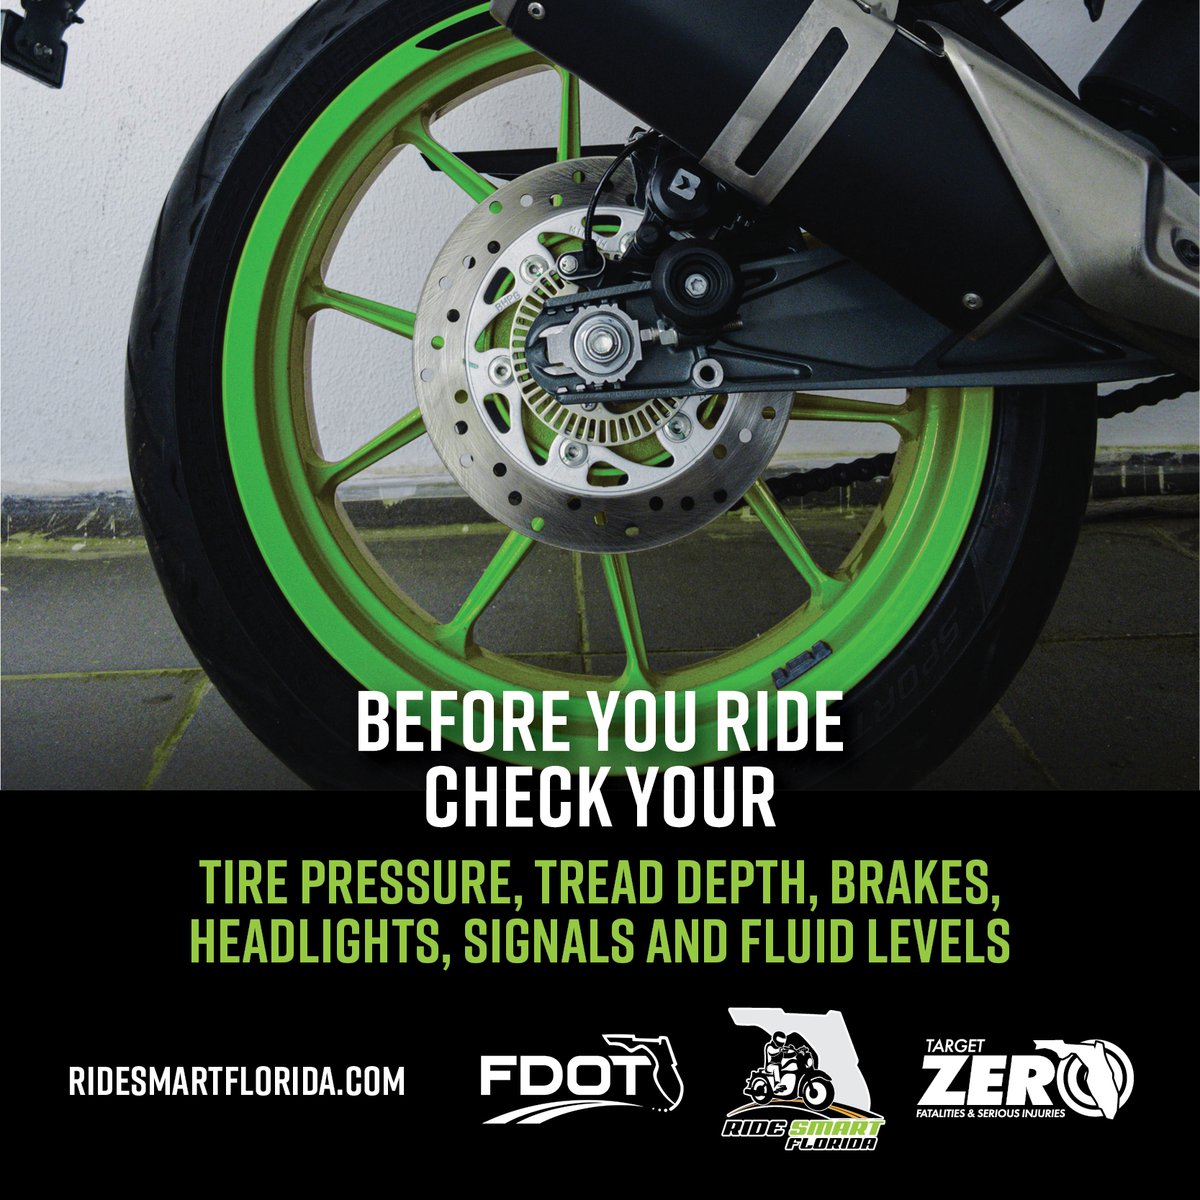 Got a motorcycle? Give it some TLC before hitting the road - check your tire pressure, tread
depth, brakes, headlights, signals and fluid levels.
#RideSmartFL #letsgeteveryonehome